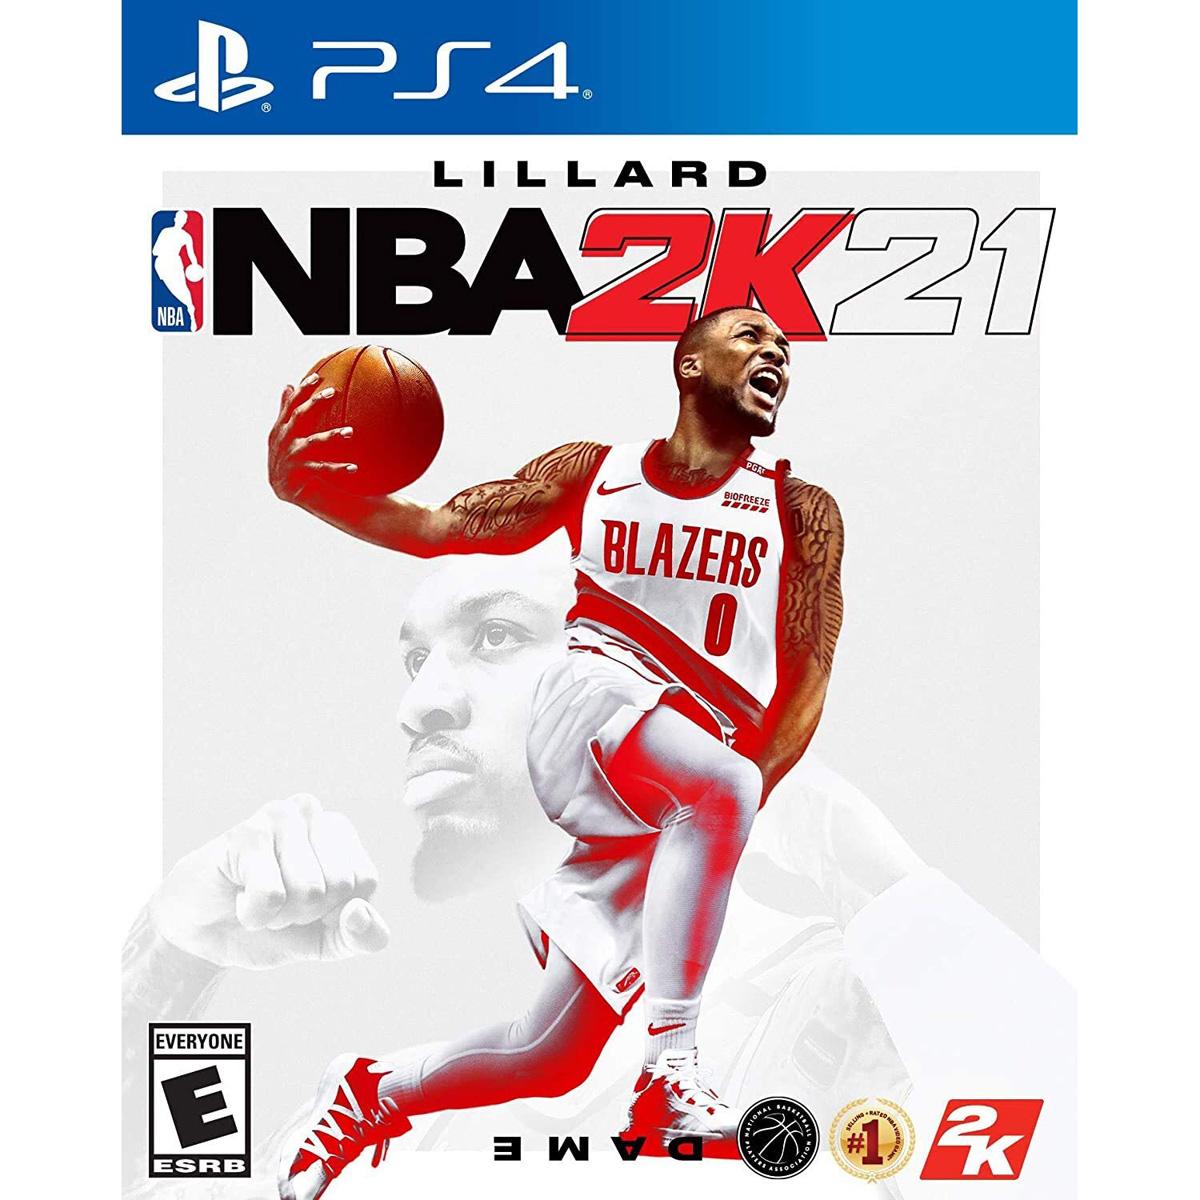 NBA 2K21 Standard Edition Game for $17.99